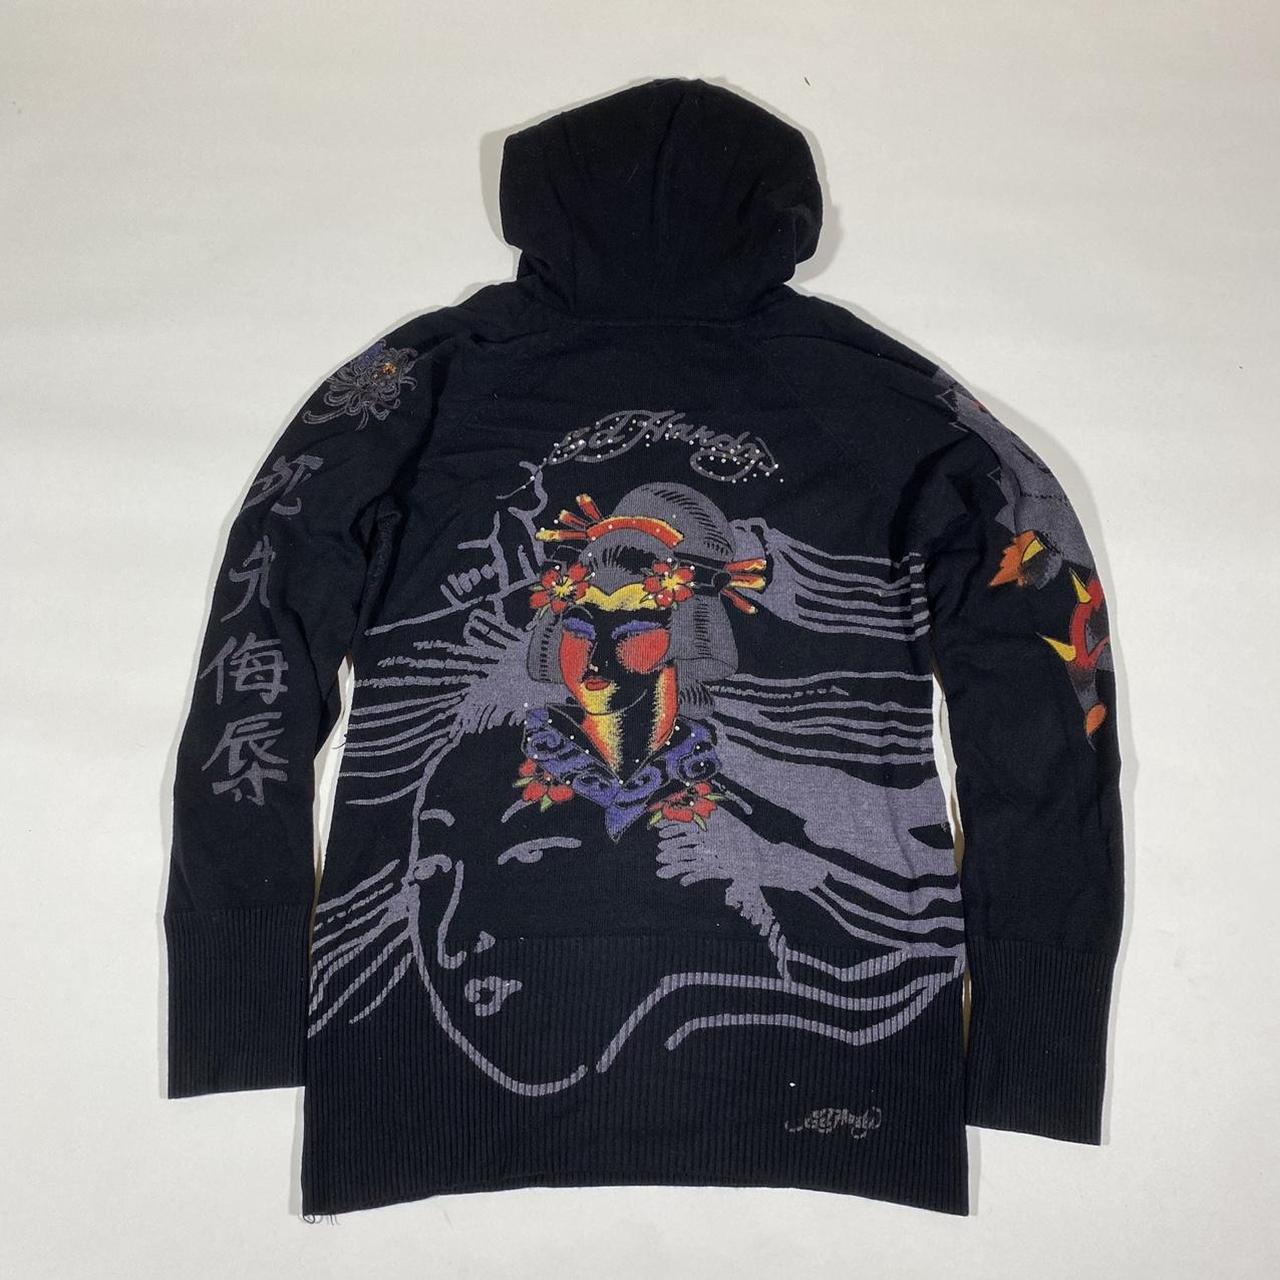 Product Image 4 - Vintage 90s Ed hardy graphic